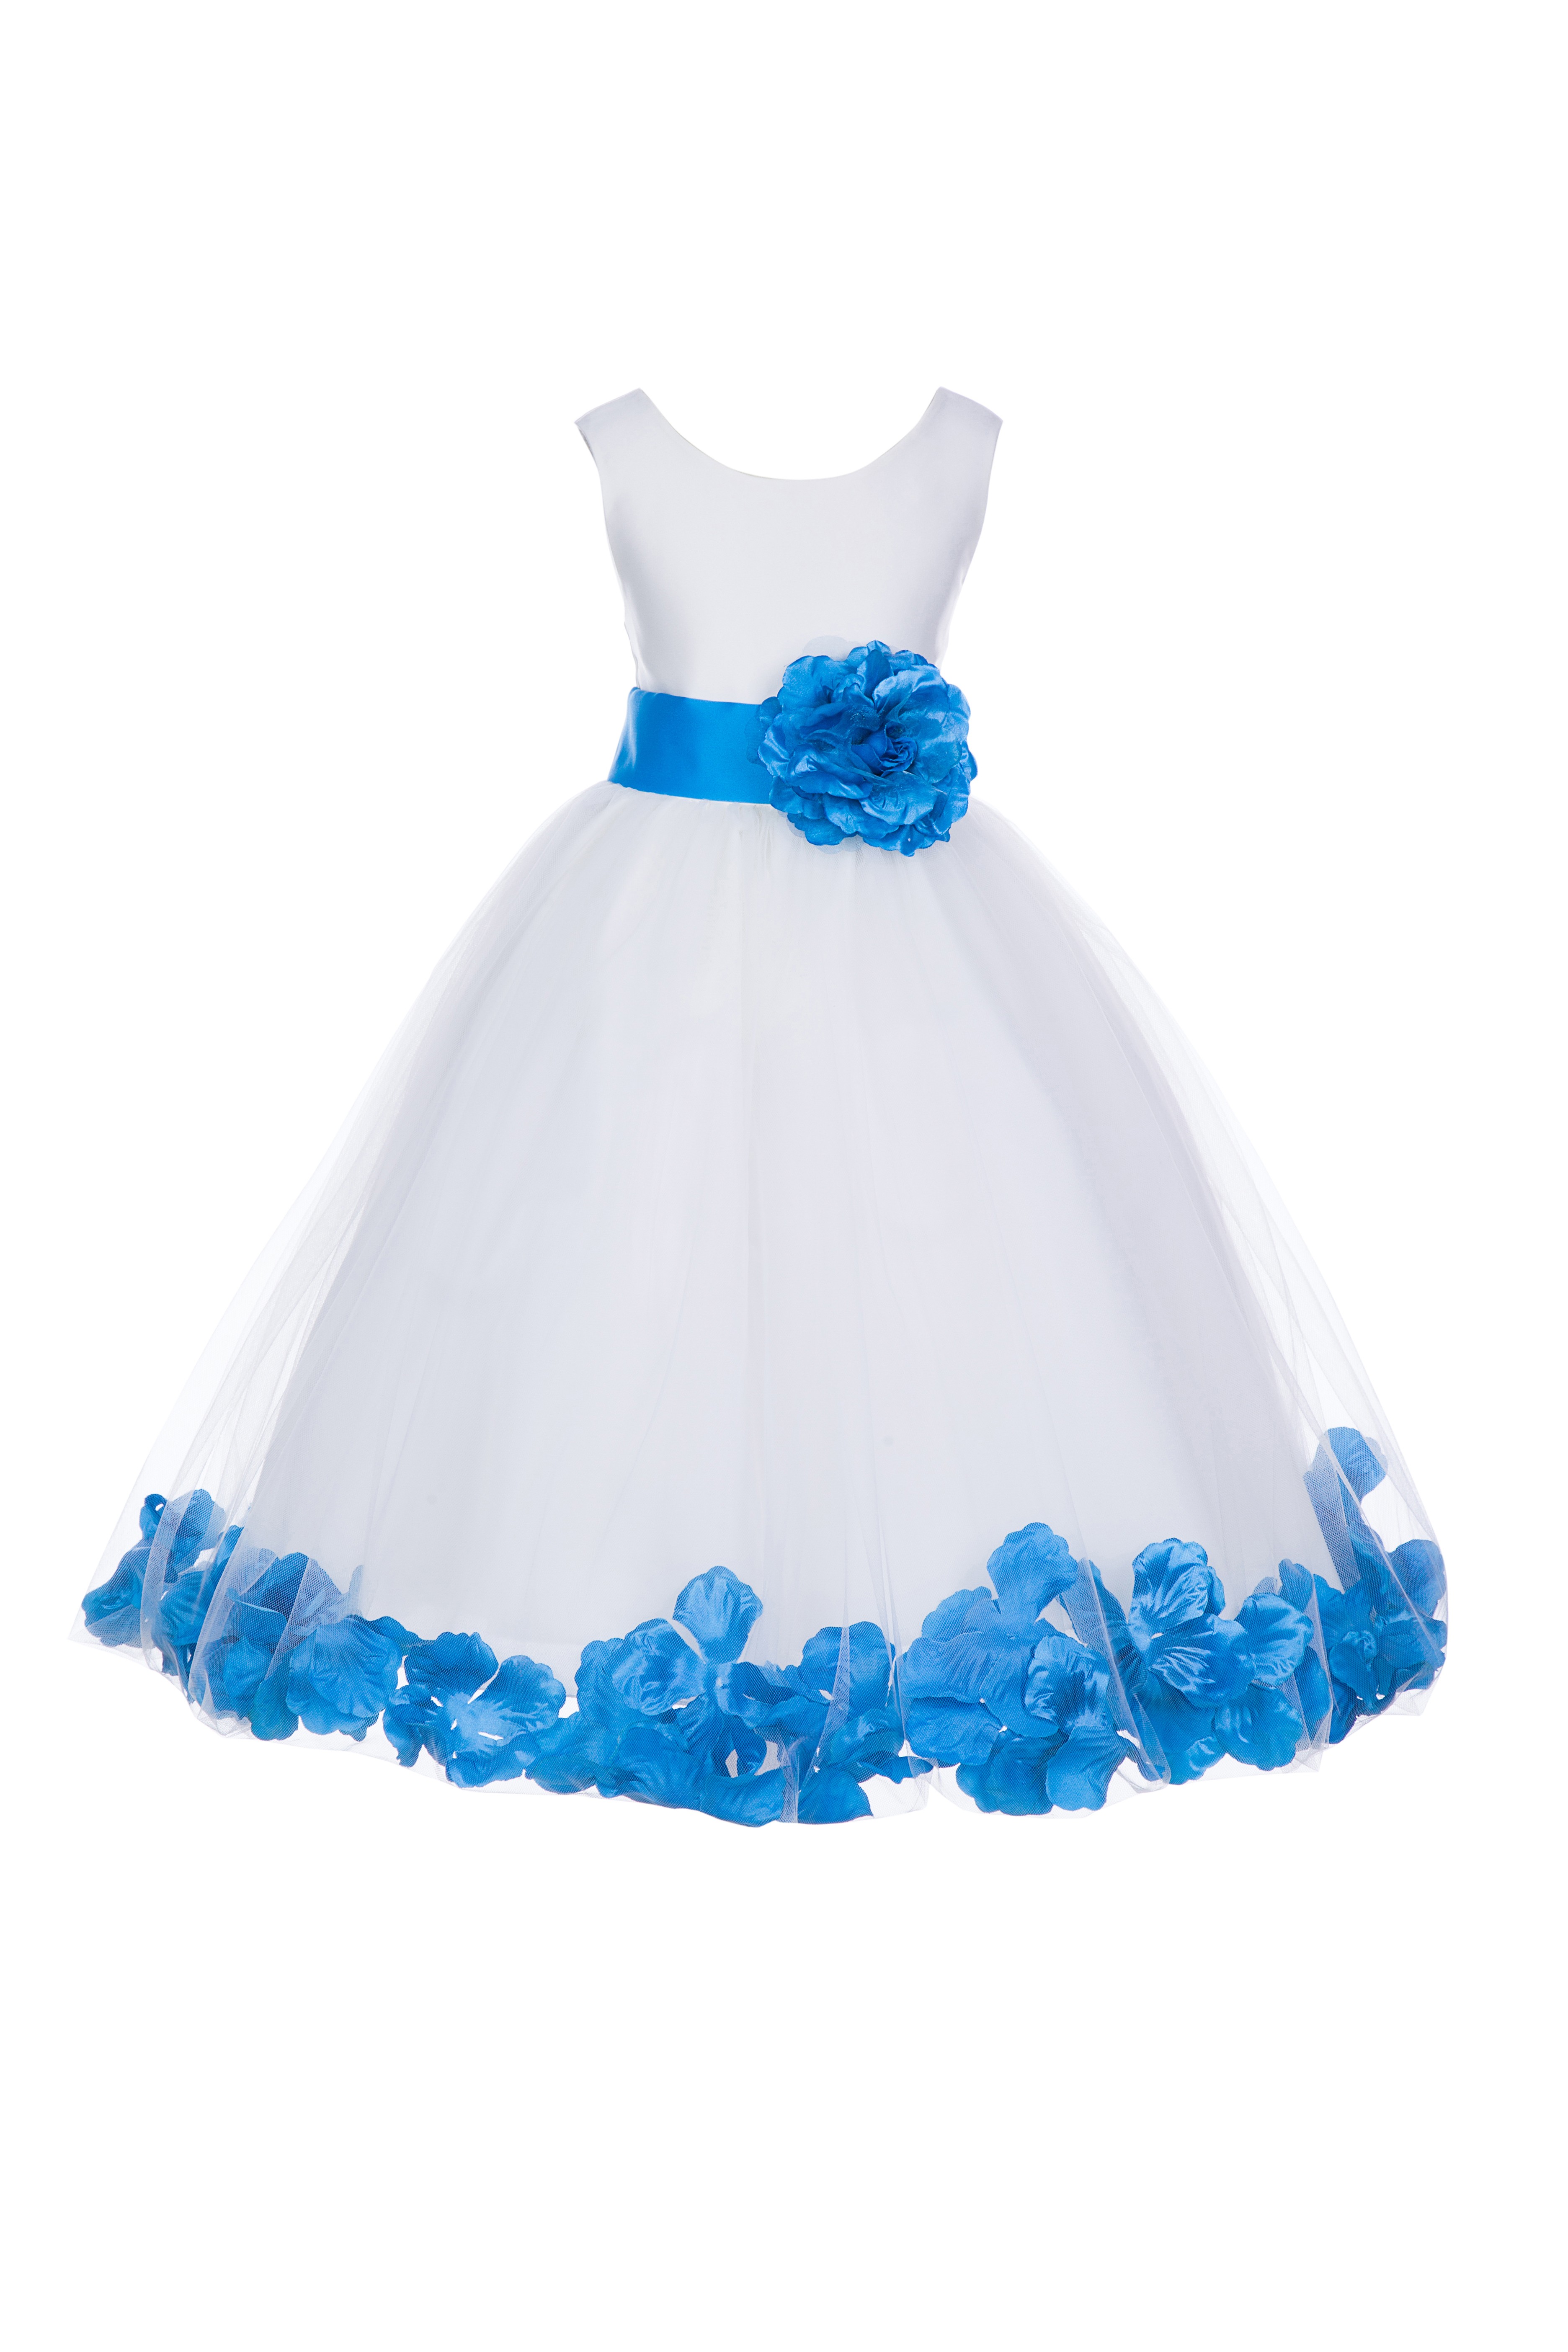 Ivory/Malibu Tulle Rose Petals Flower Girl Dress Pageant 302S